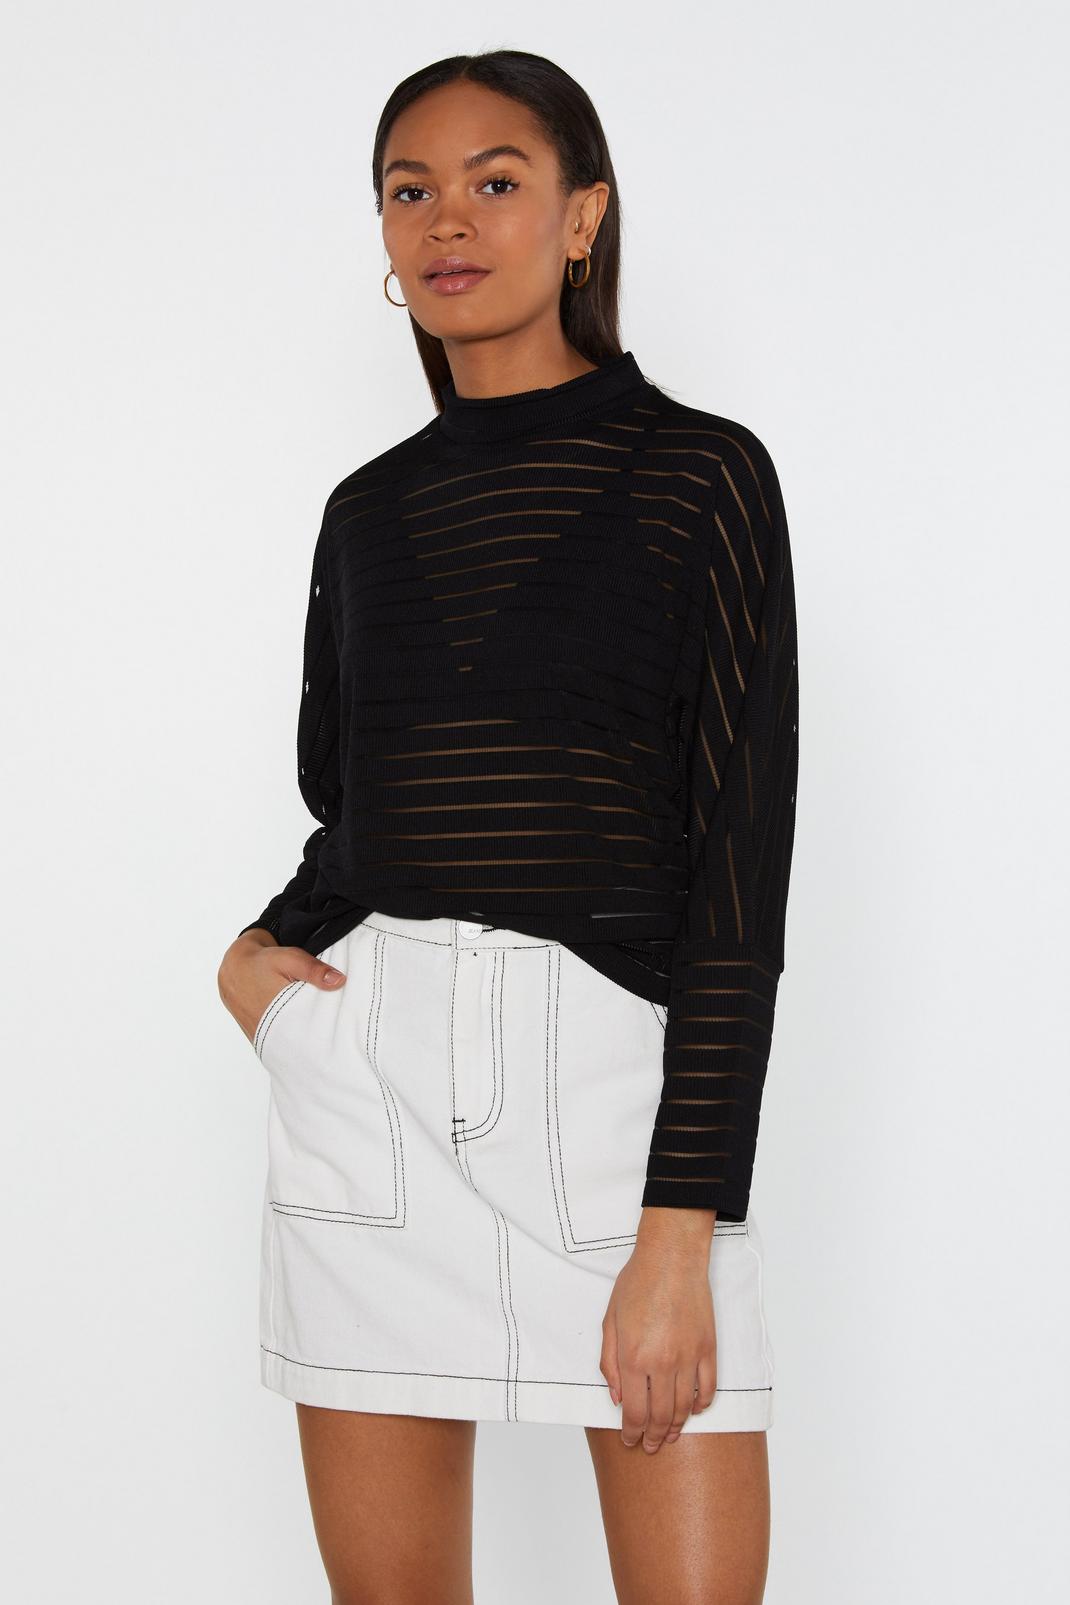 Fancy Seeing You Sheer Mesh Striped Top image number 1